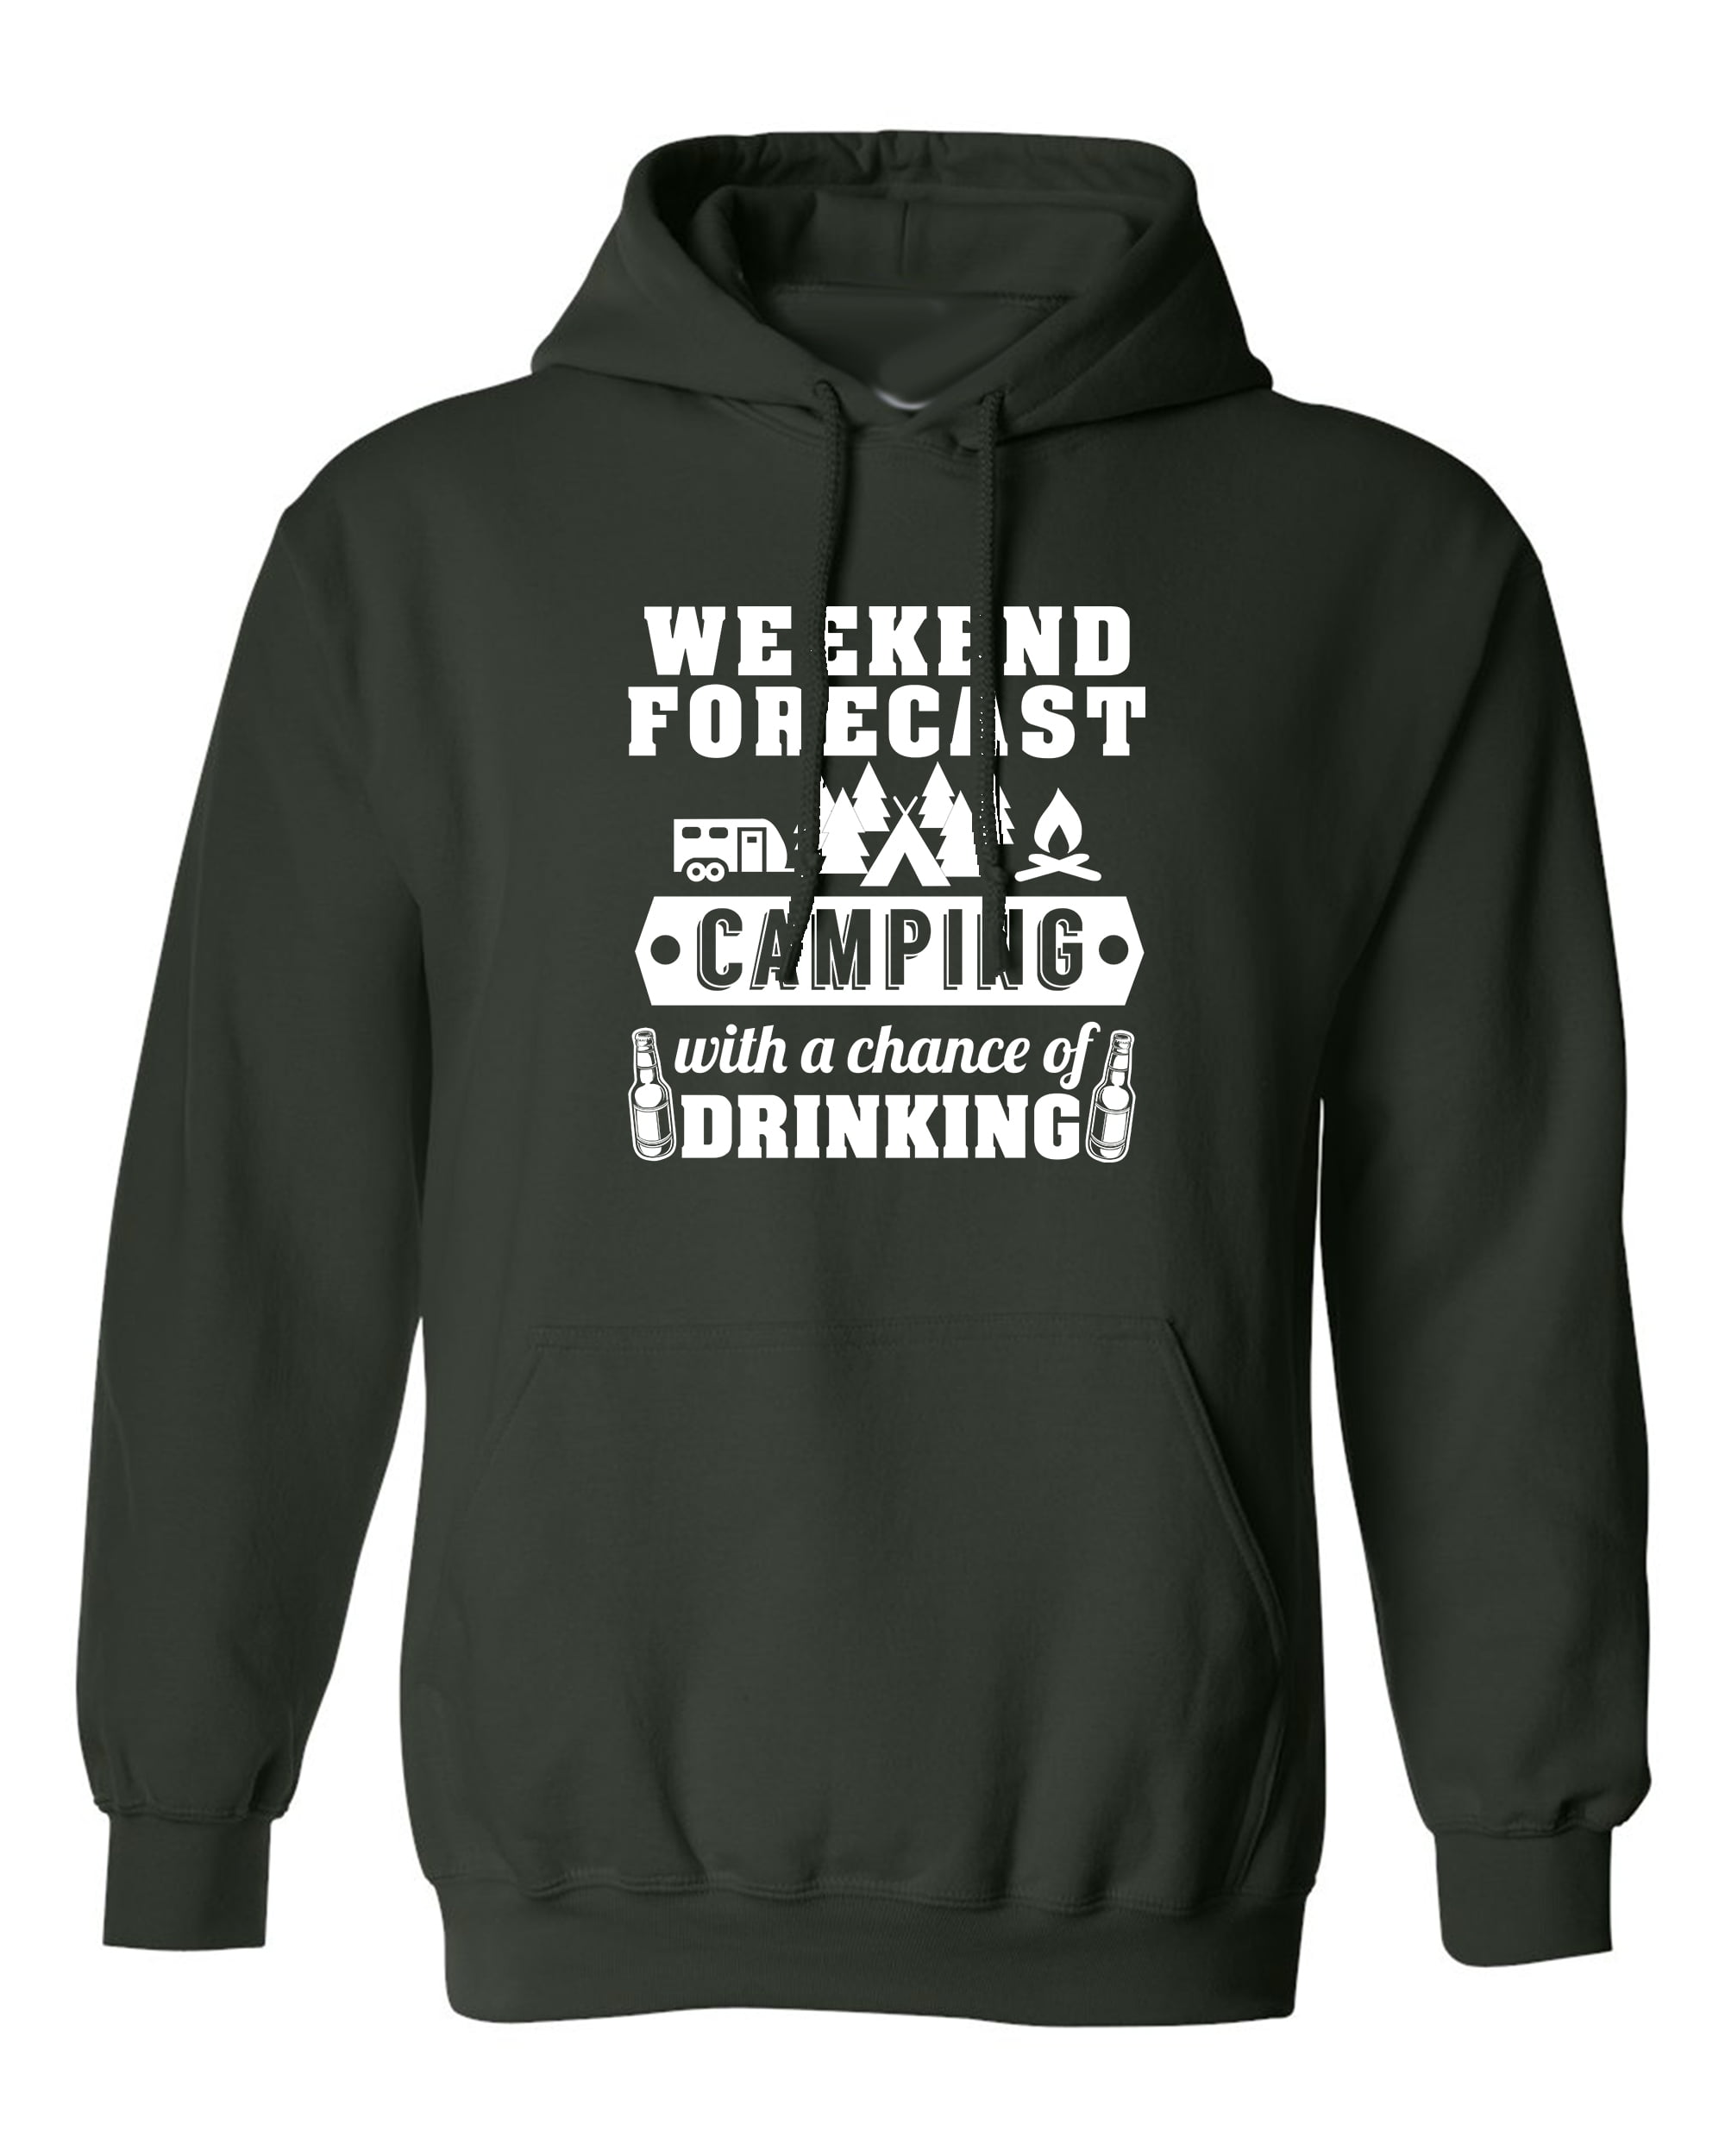 WEEKEND FORECAST CAMPING WITH DRINKING CAMP RV MENS FUNNY SWEATSHIRT 